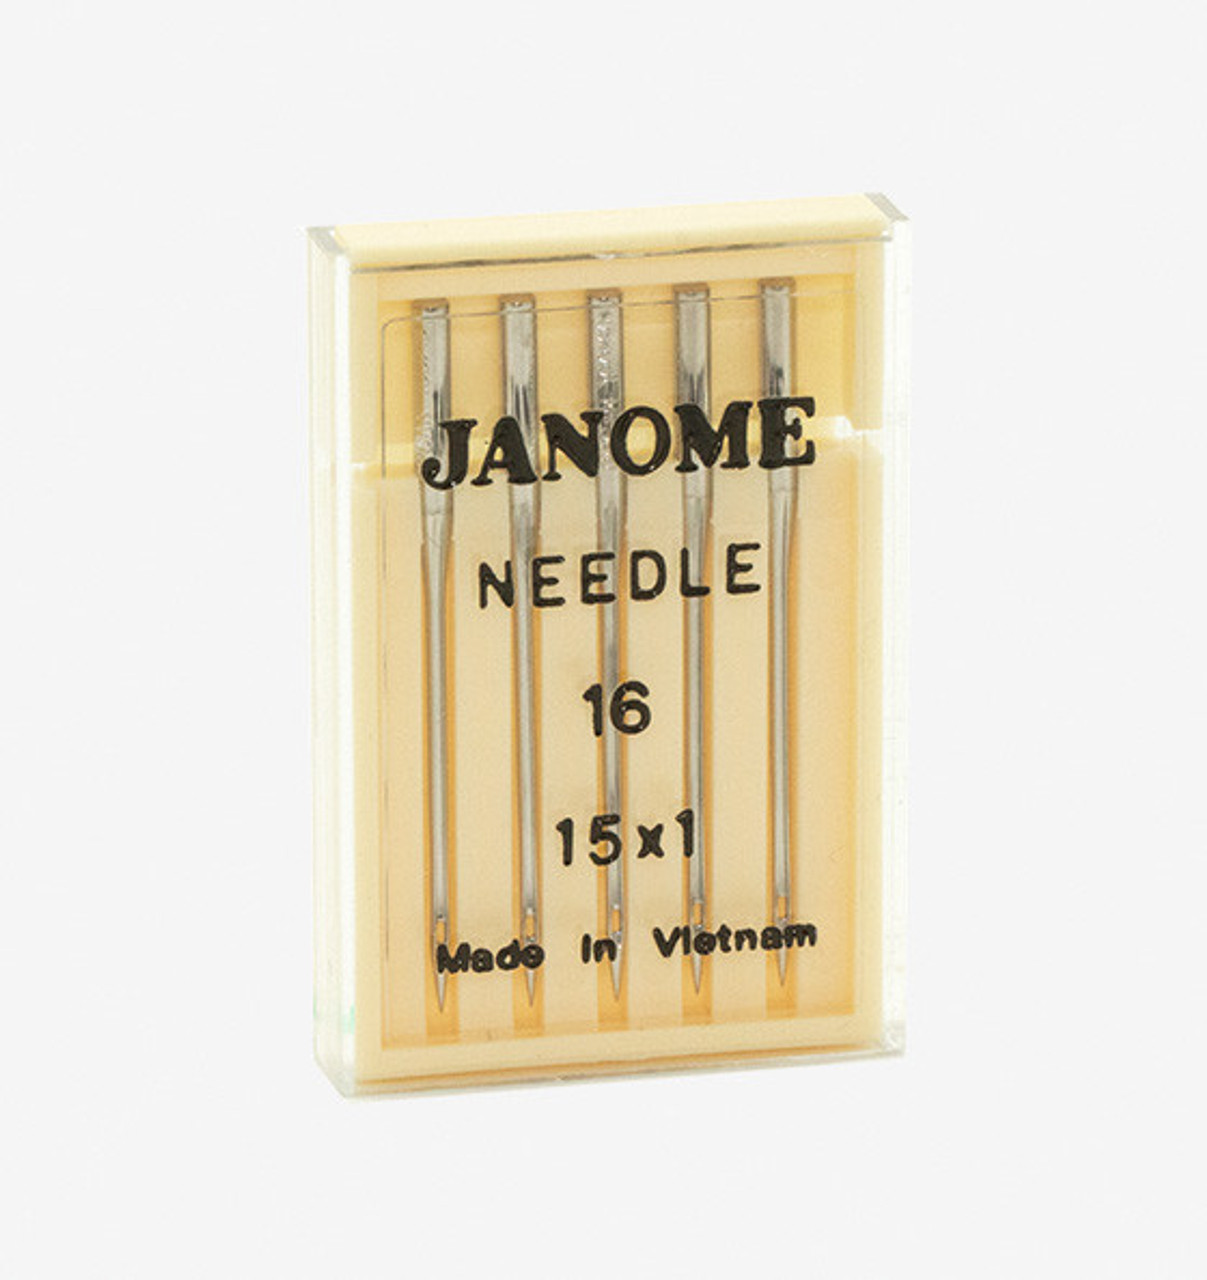 Janome Universal Needles (15x1) - Size 11 (5 pack) - Red Deer Sewing Centre